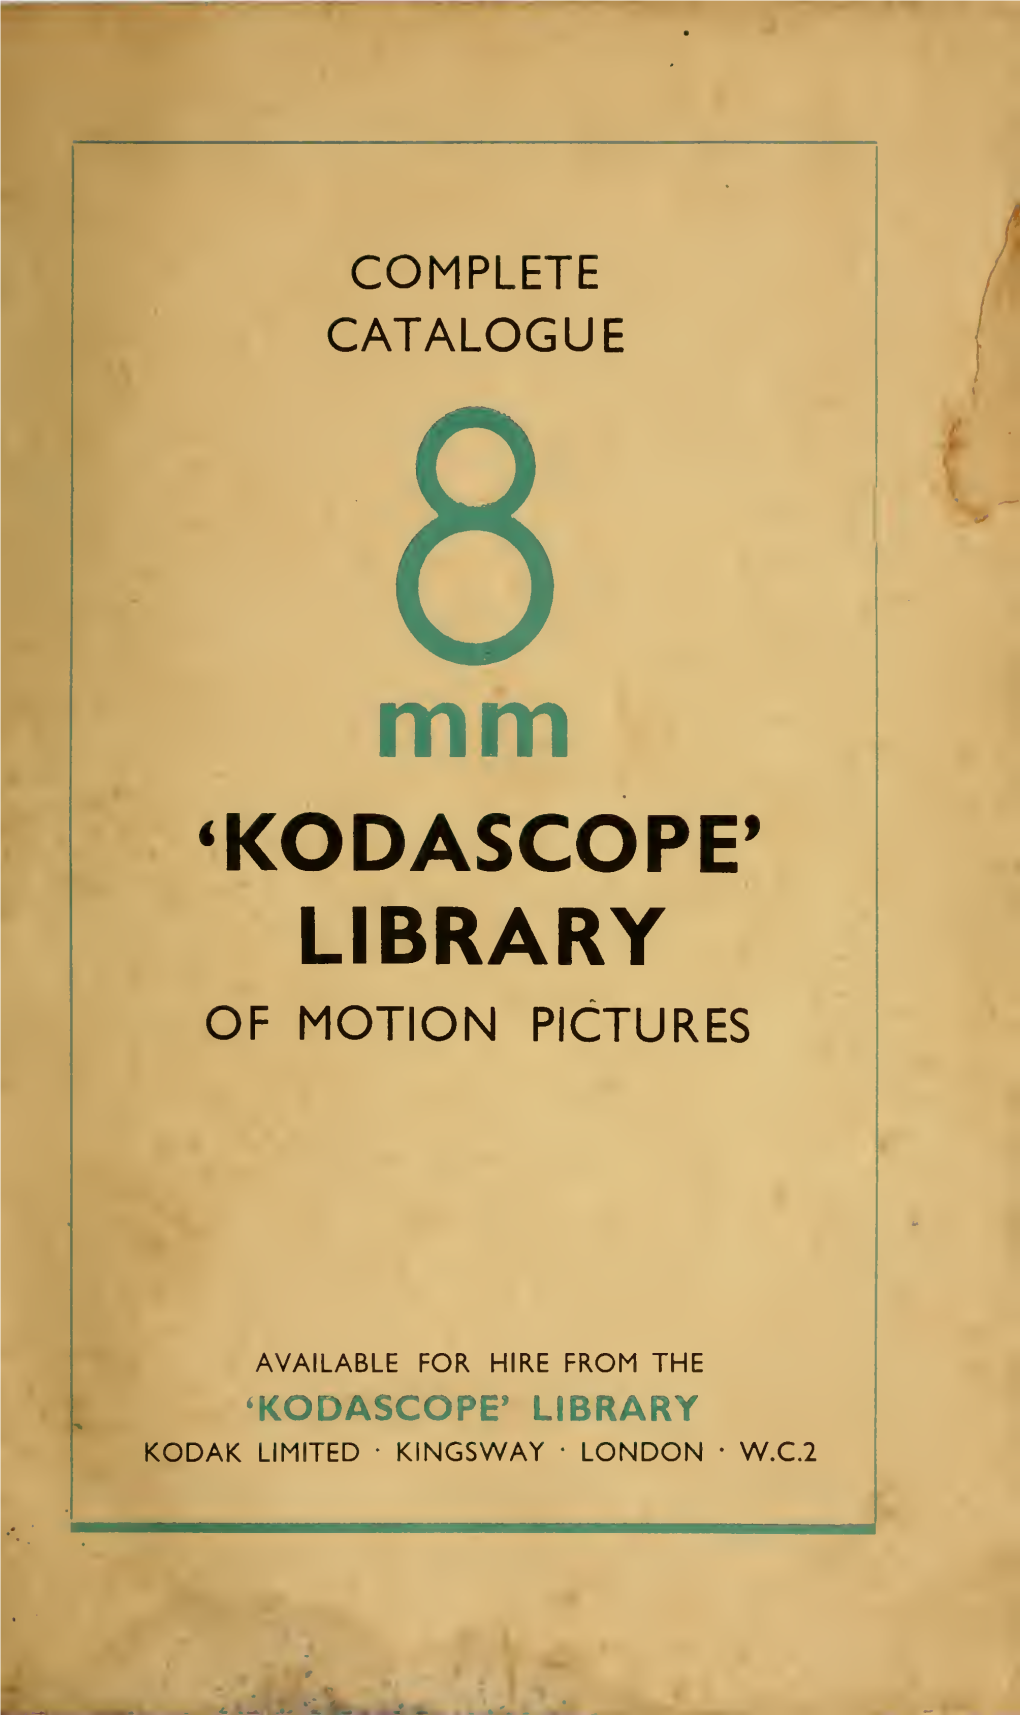 Complete Catalogue 8Mm Kodascope Library of Motion Pictures